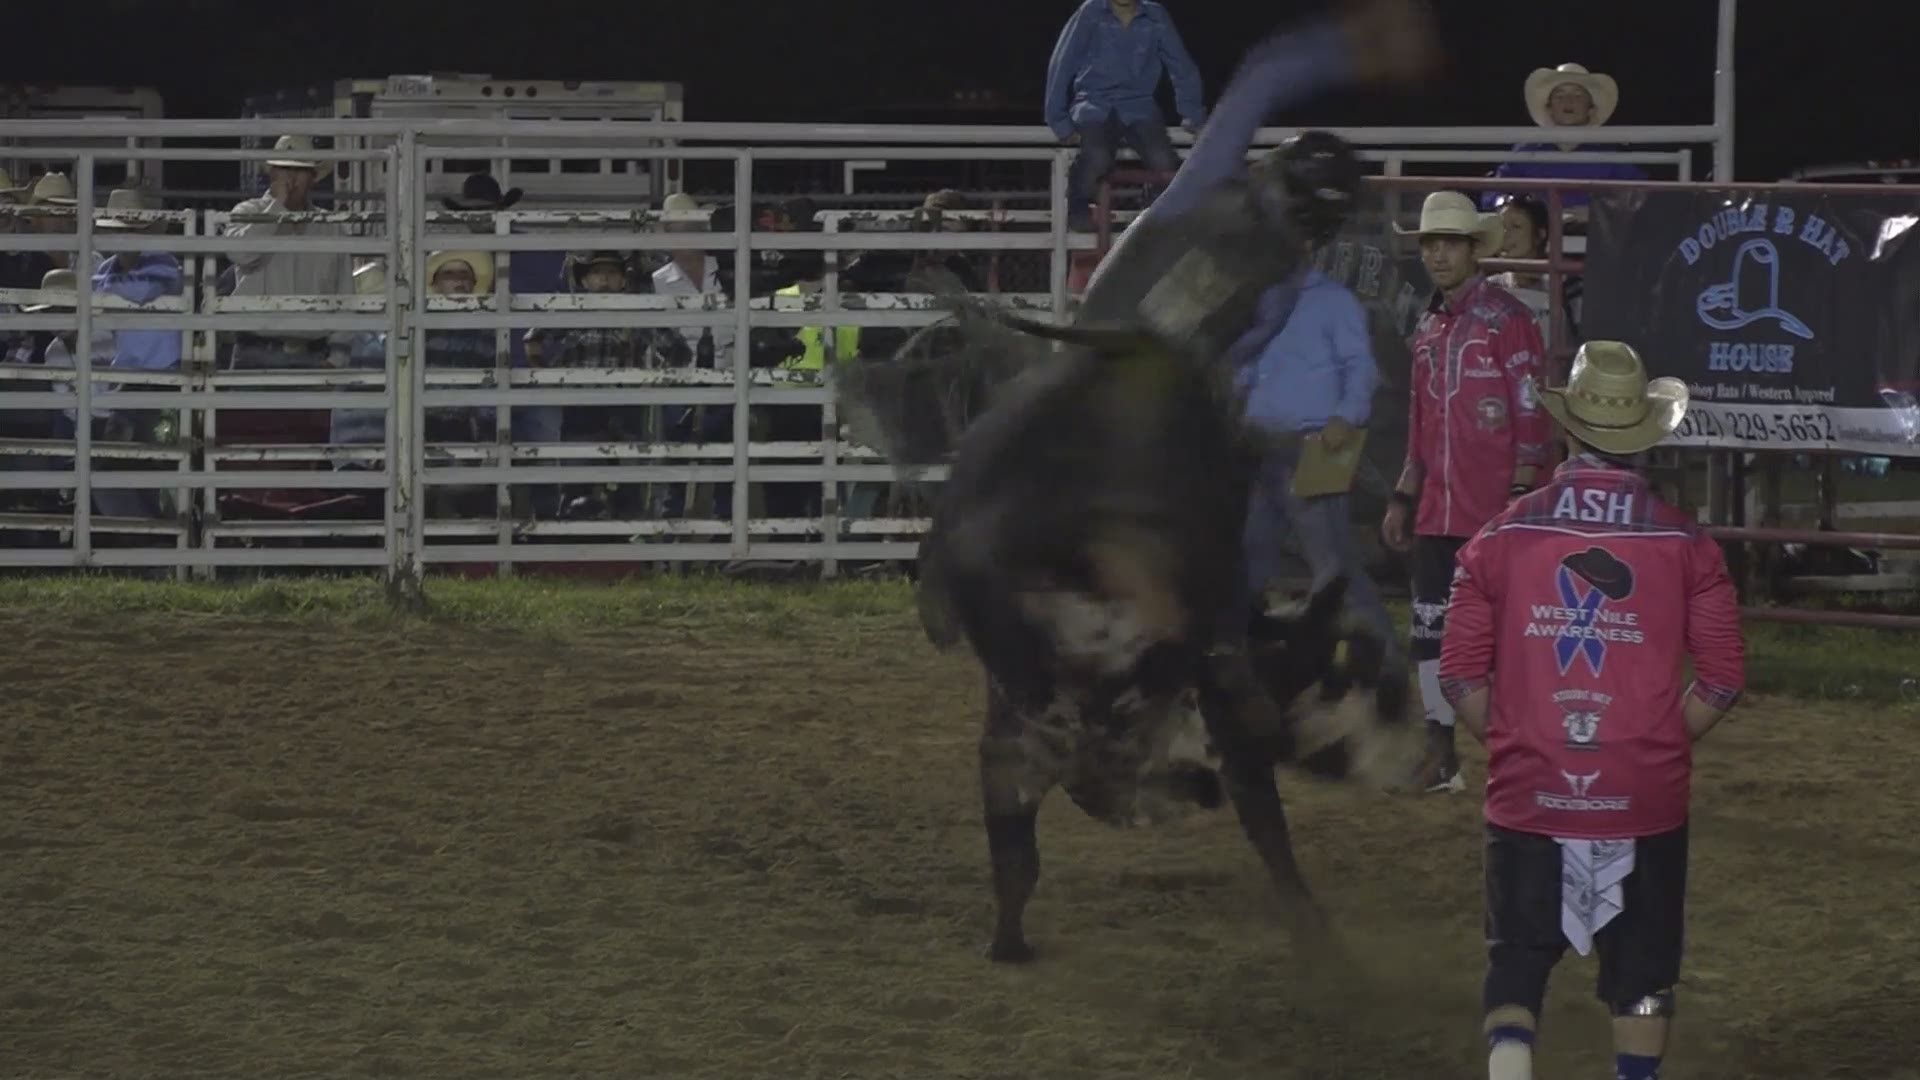 A Bastrop County teen is being remembered tonight in a unique way.
The parents of Cody Hopkins organized a bull riding benefit to honor their son.
Hopkins died from West Nile Virus in 2016.